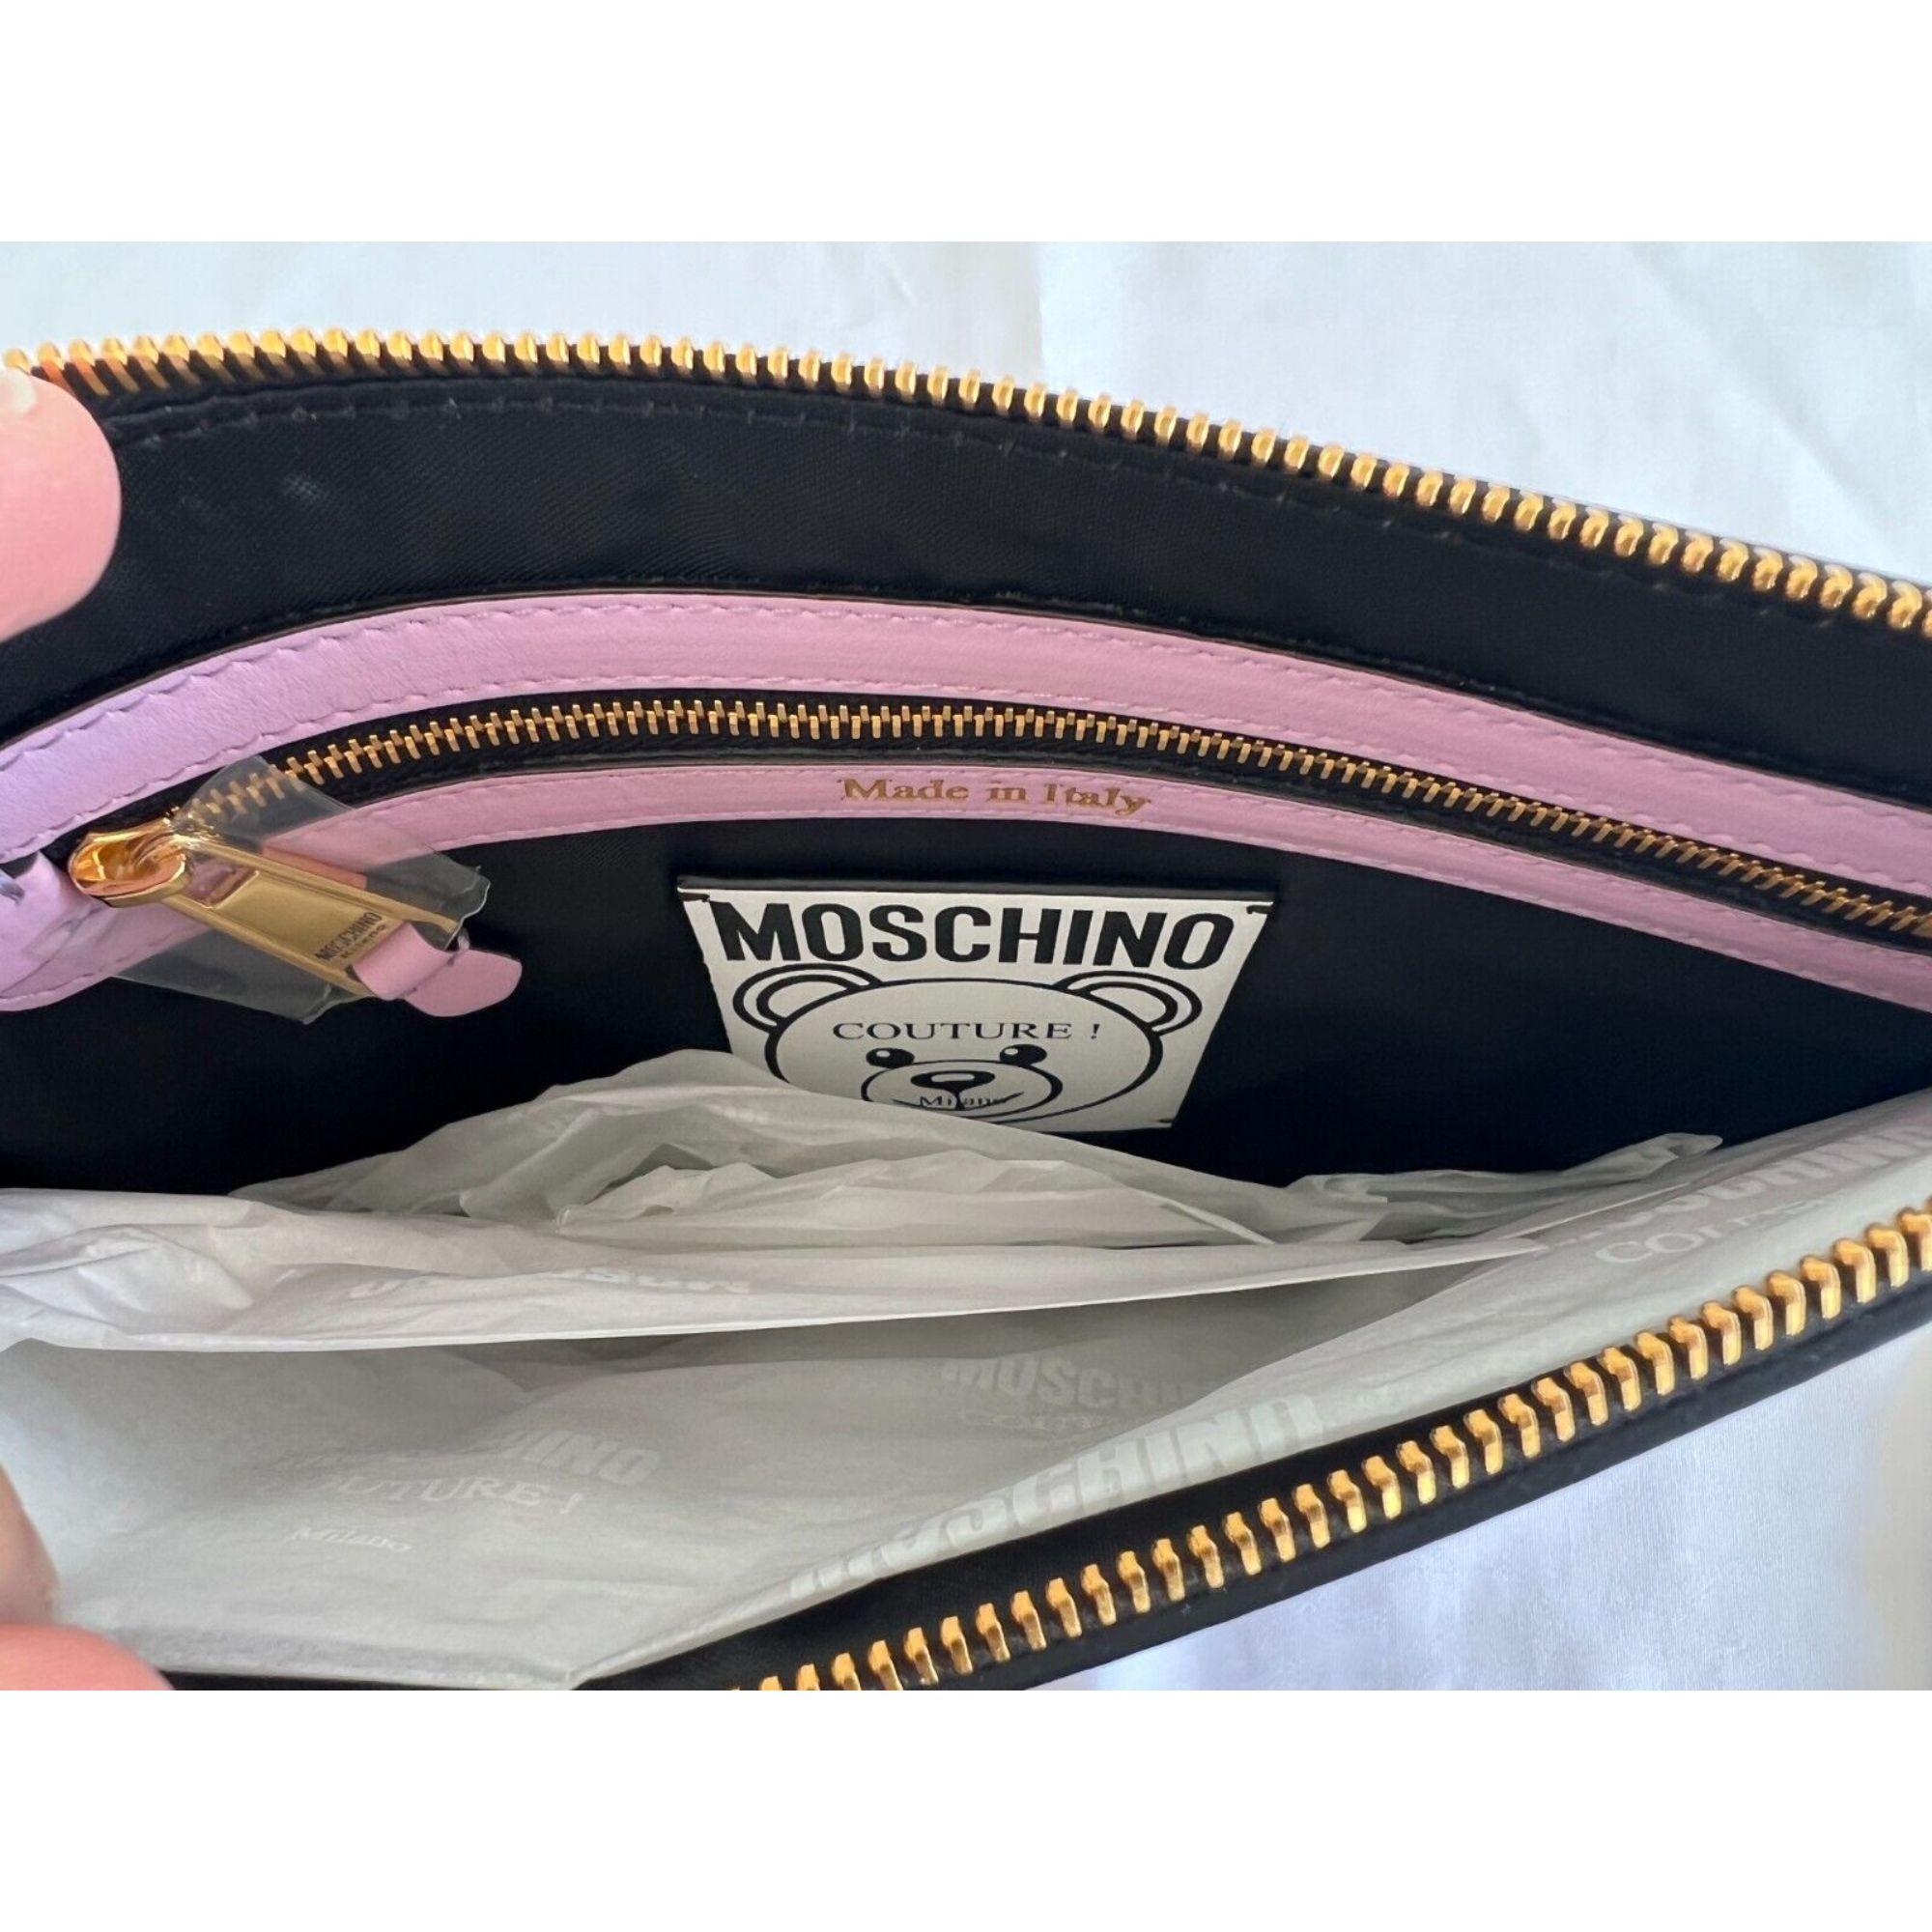 SS21 Moschino Couture Pink Clutch with Embroidered Teddy Bear by Jeremy Scott In New Condition For Sale In Palm Springs, CA